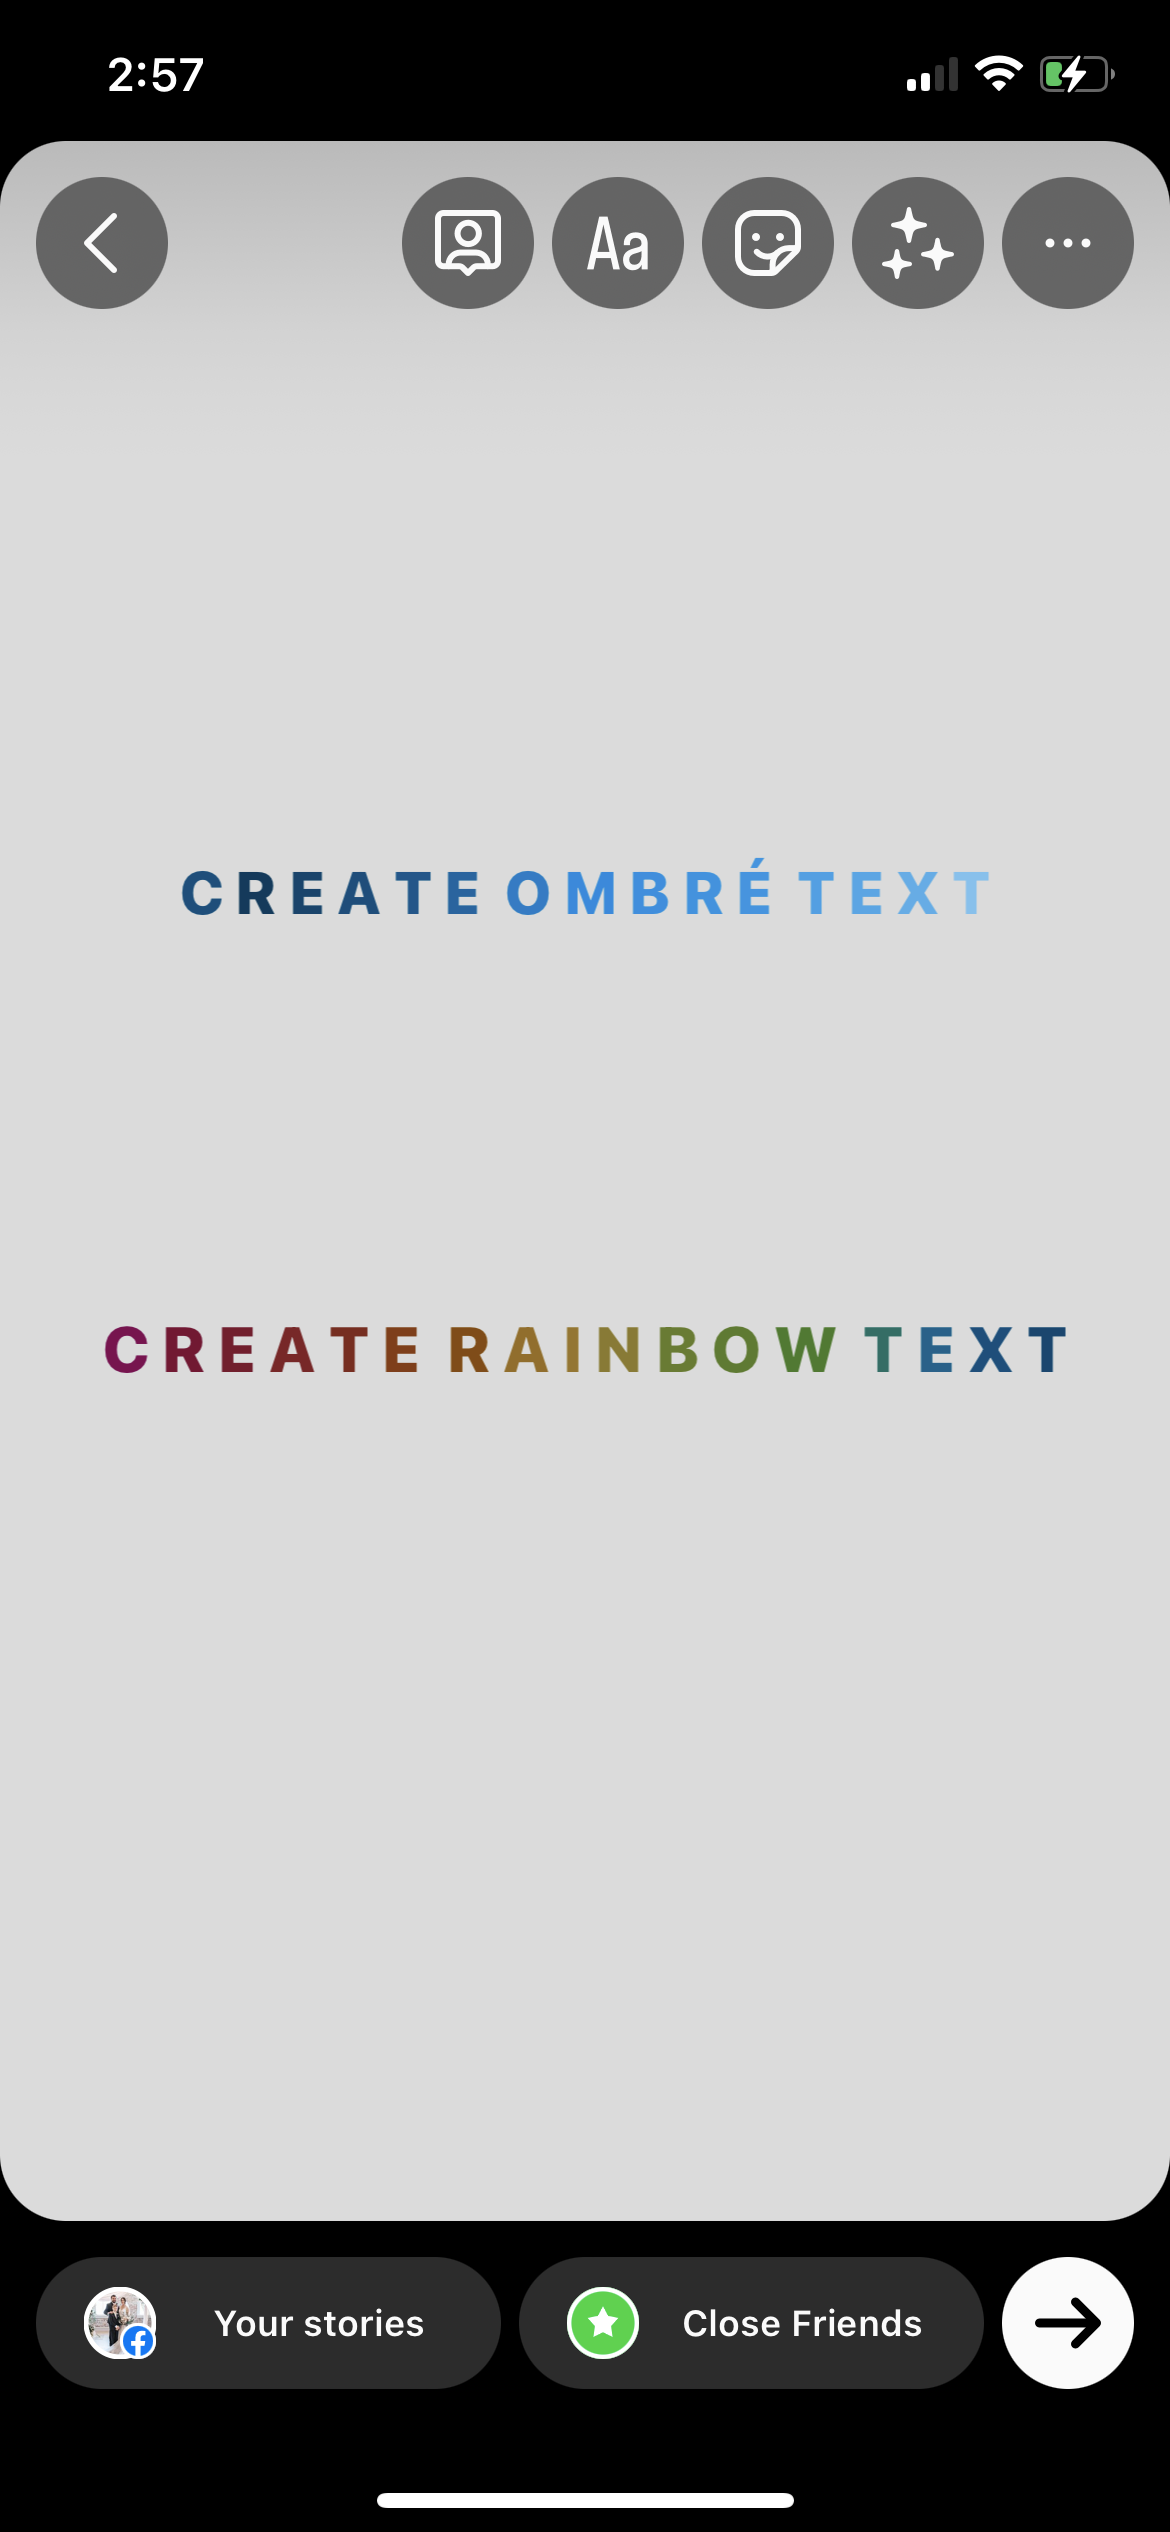 A screenshot showing ombré and rainbow text in an Instagram story